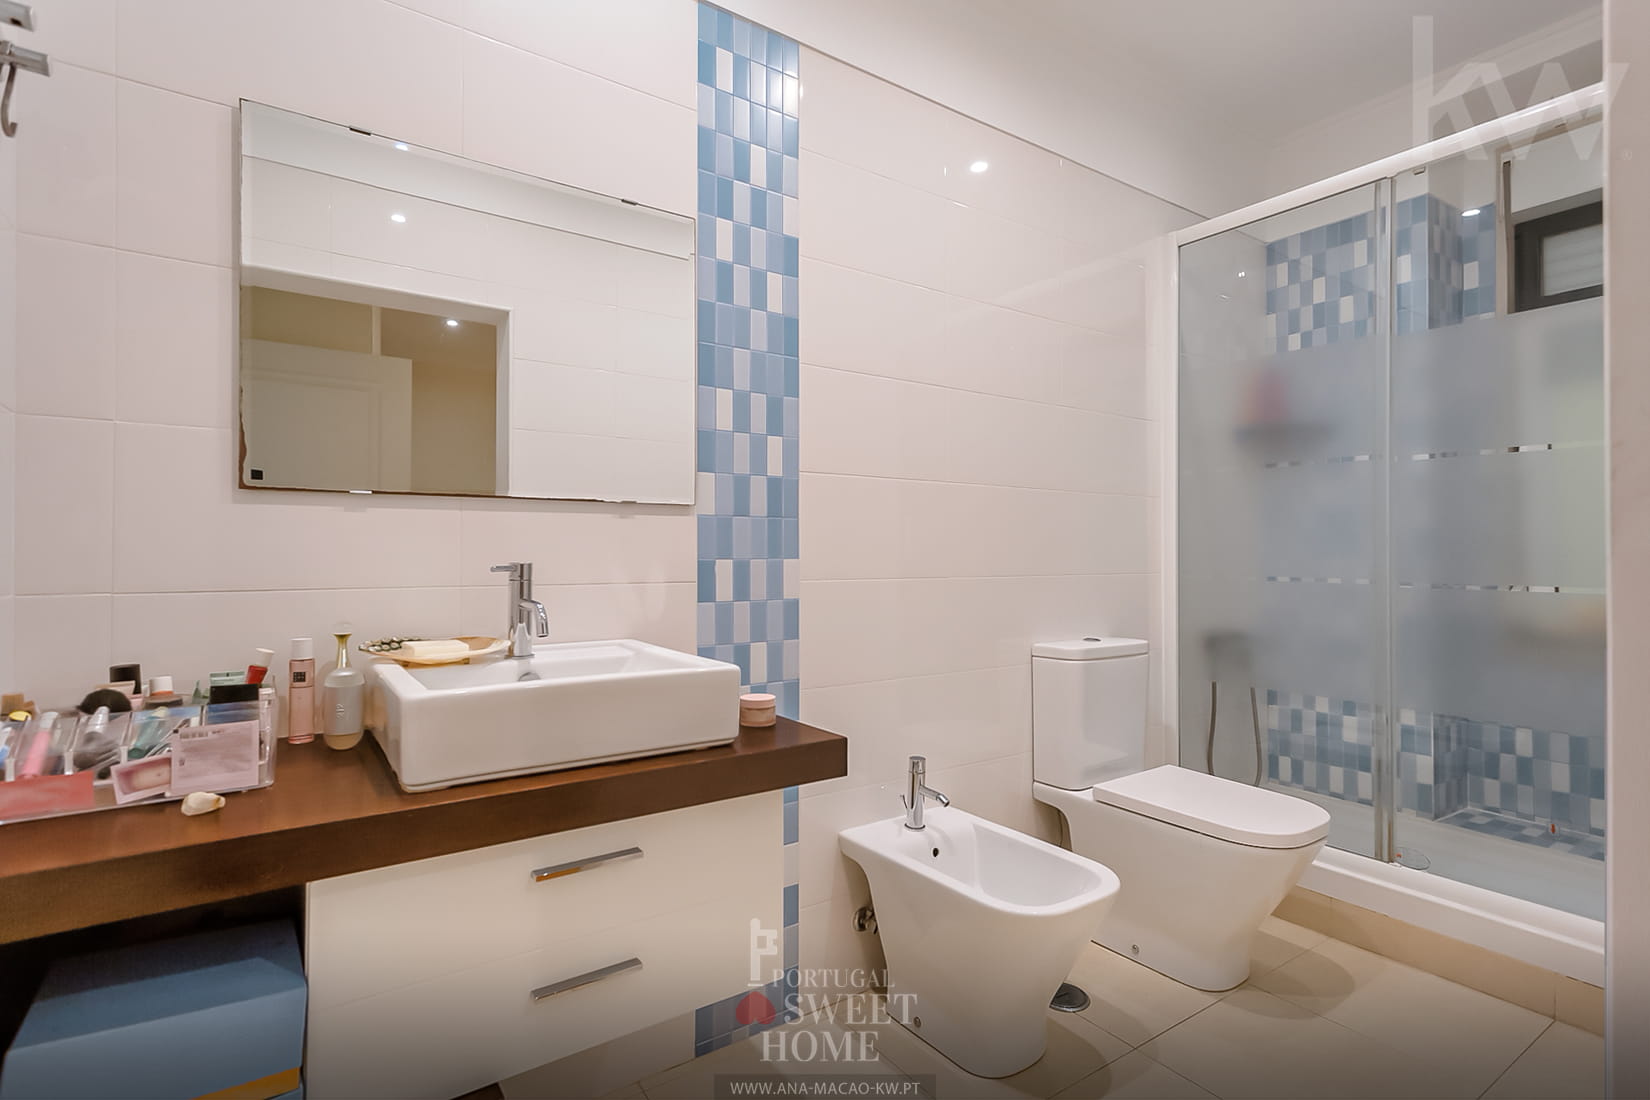 Bathroom of the second Suite (4.6 m²)